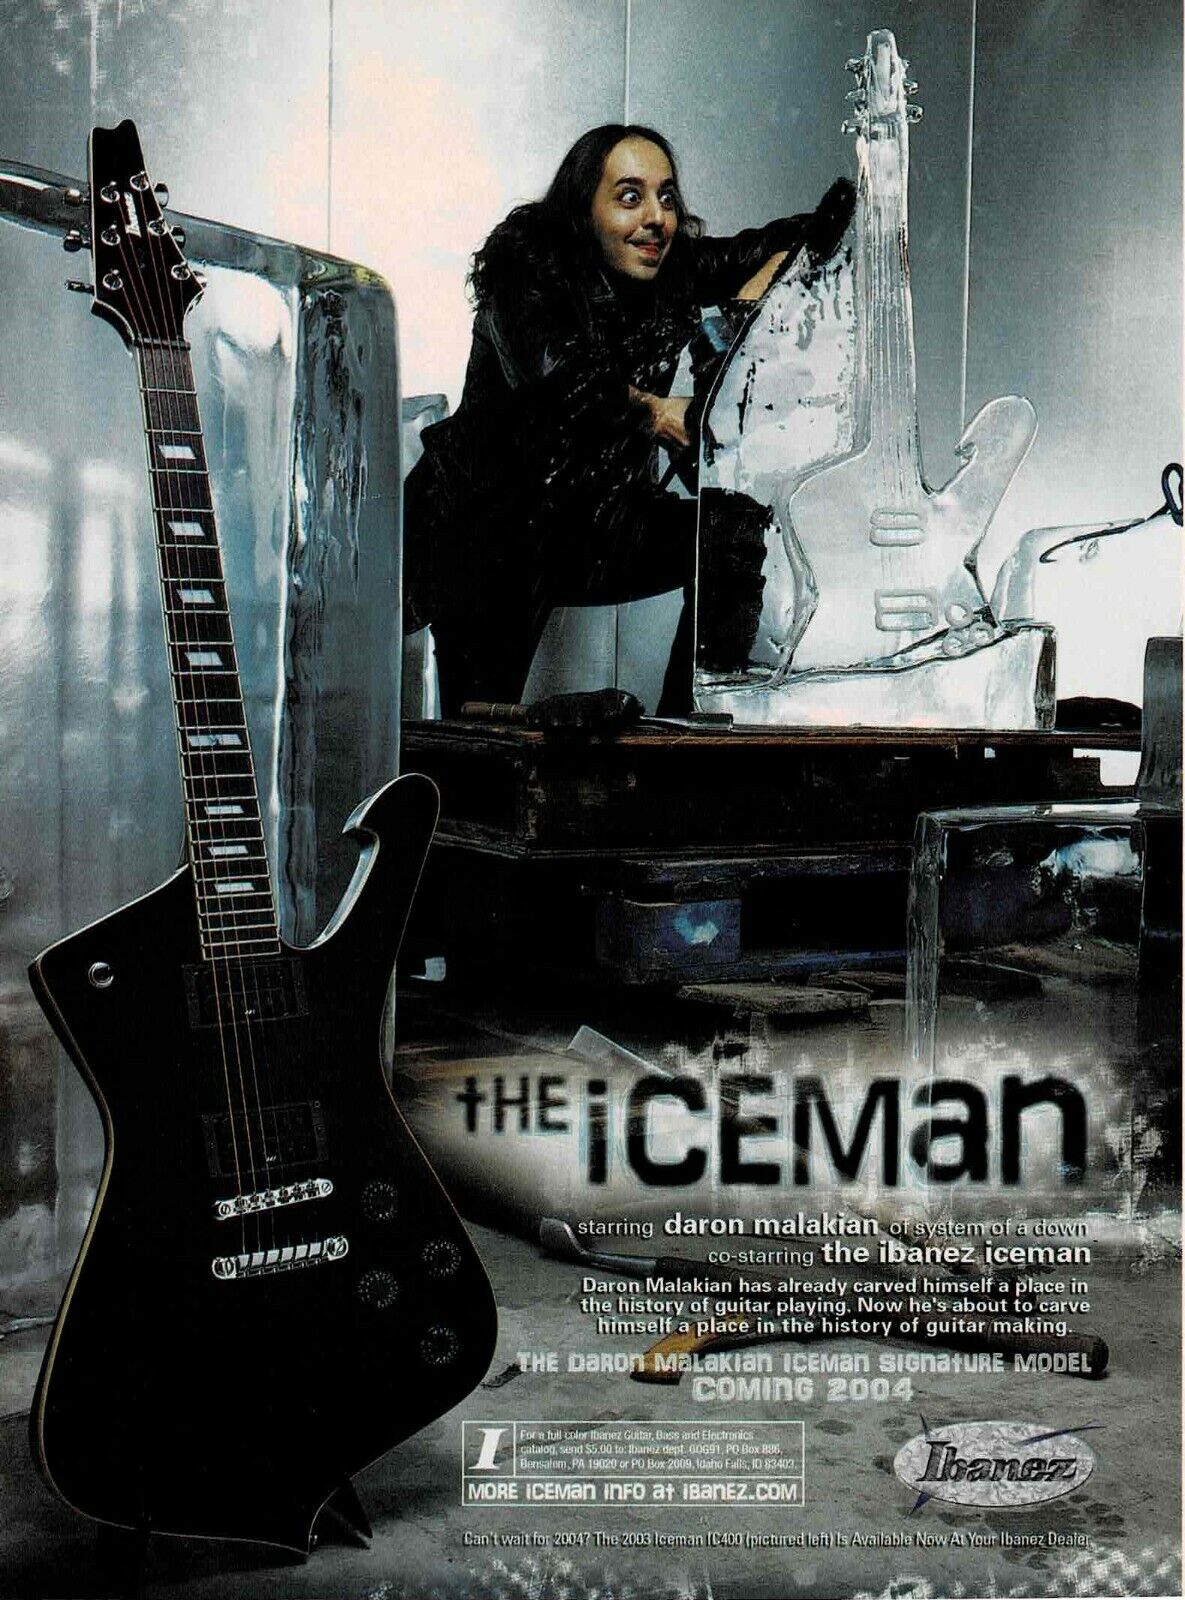 Ibanez Guitars - The IceMan - DARON MALAKIAN of SYSTEM of A DOWN - 2003 Print Ad